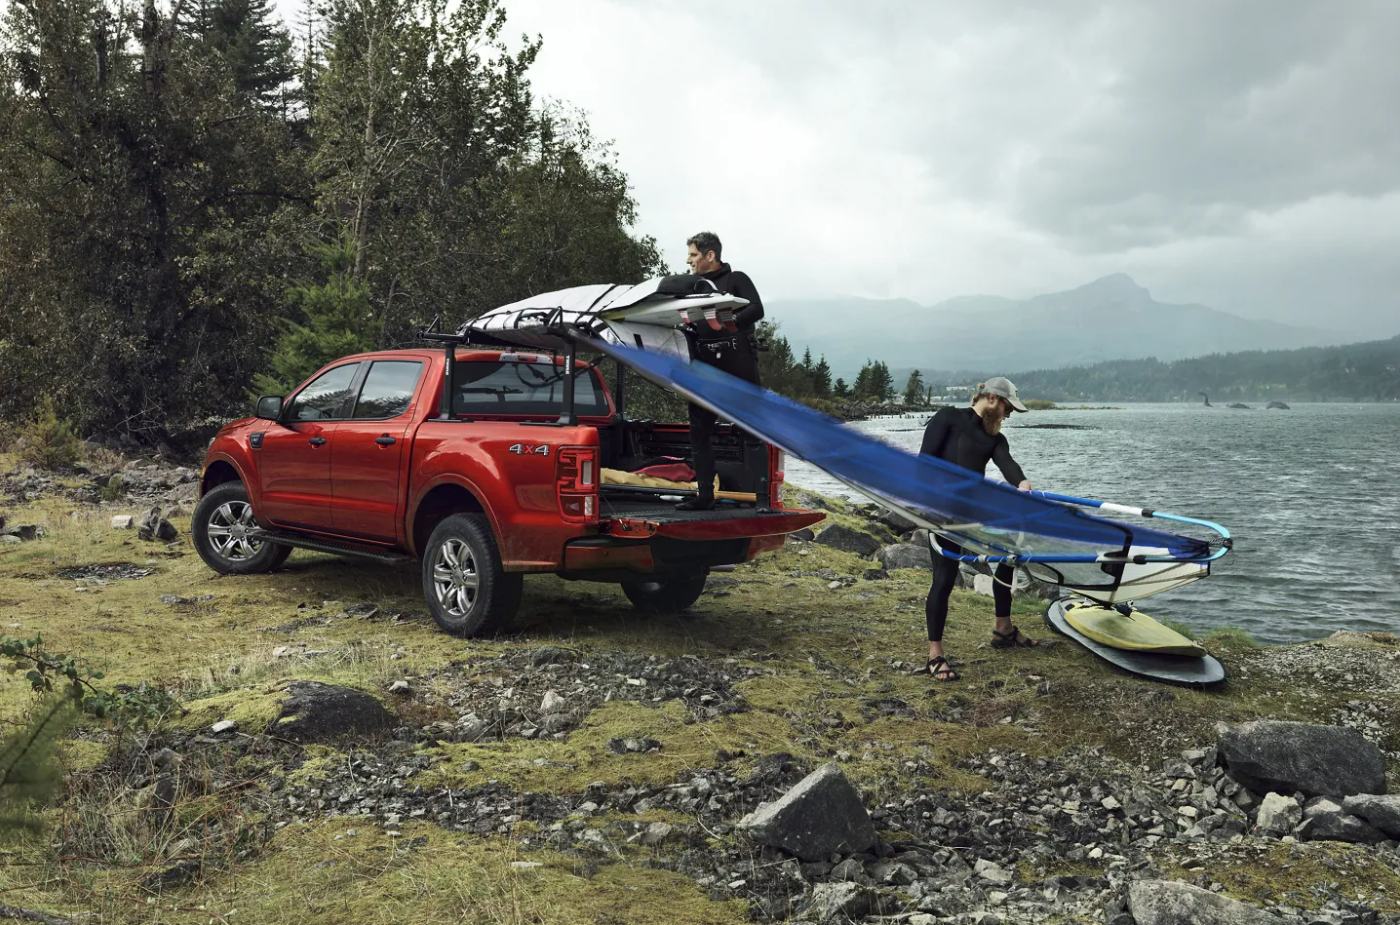 Two men unload windsurfing gear from the back of a red 2023 Ford Ranger parked next to a lake